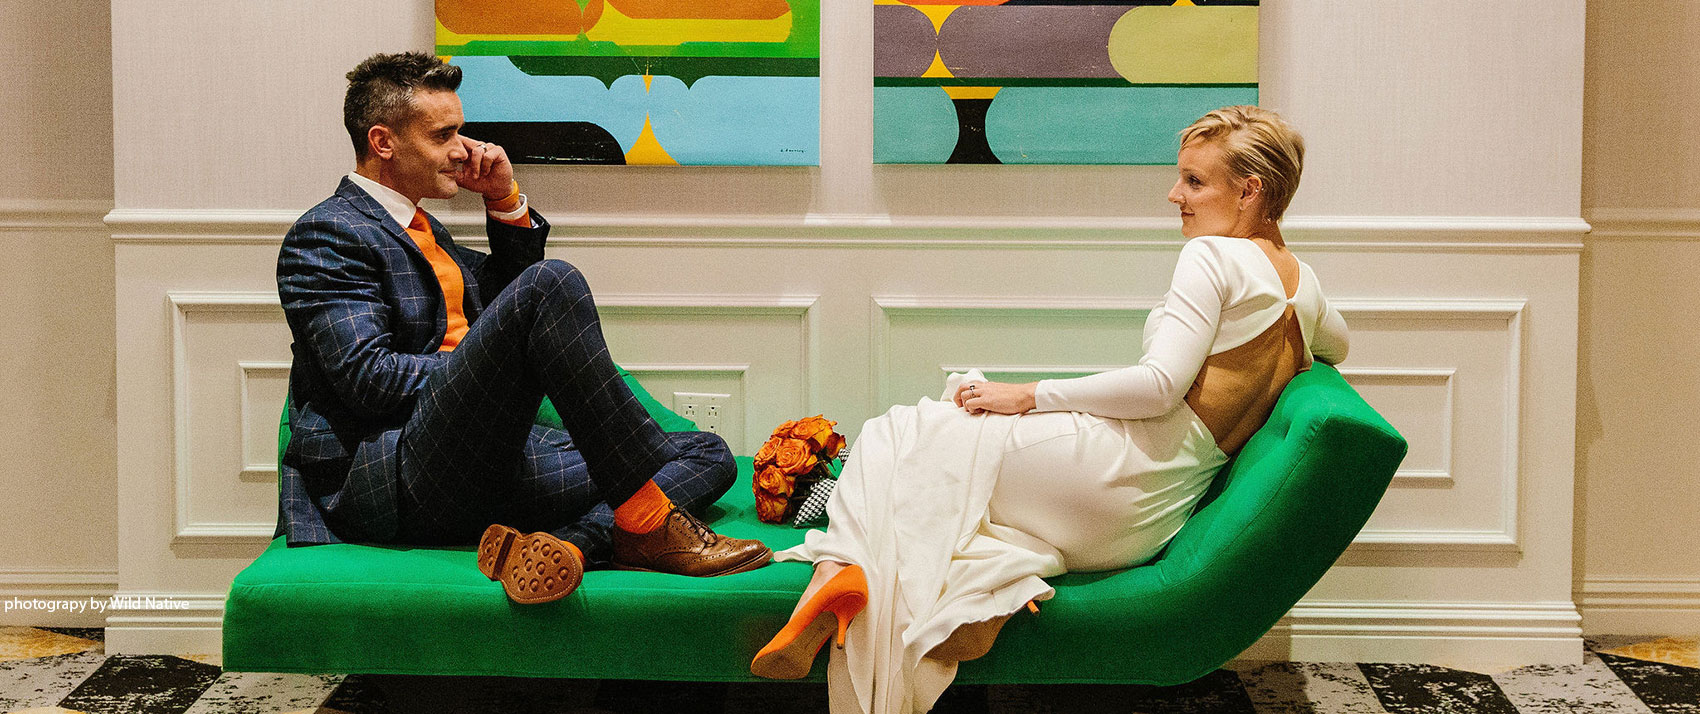 Two people sitting on green couch